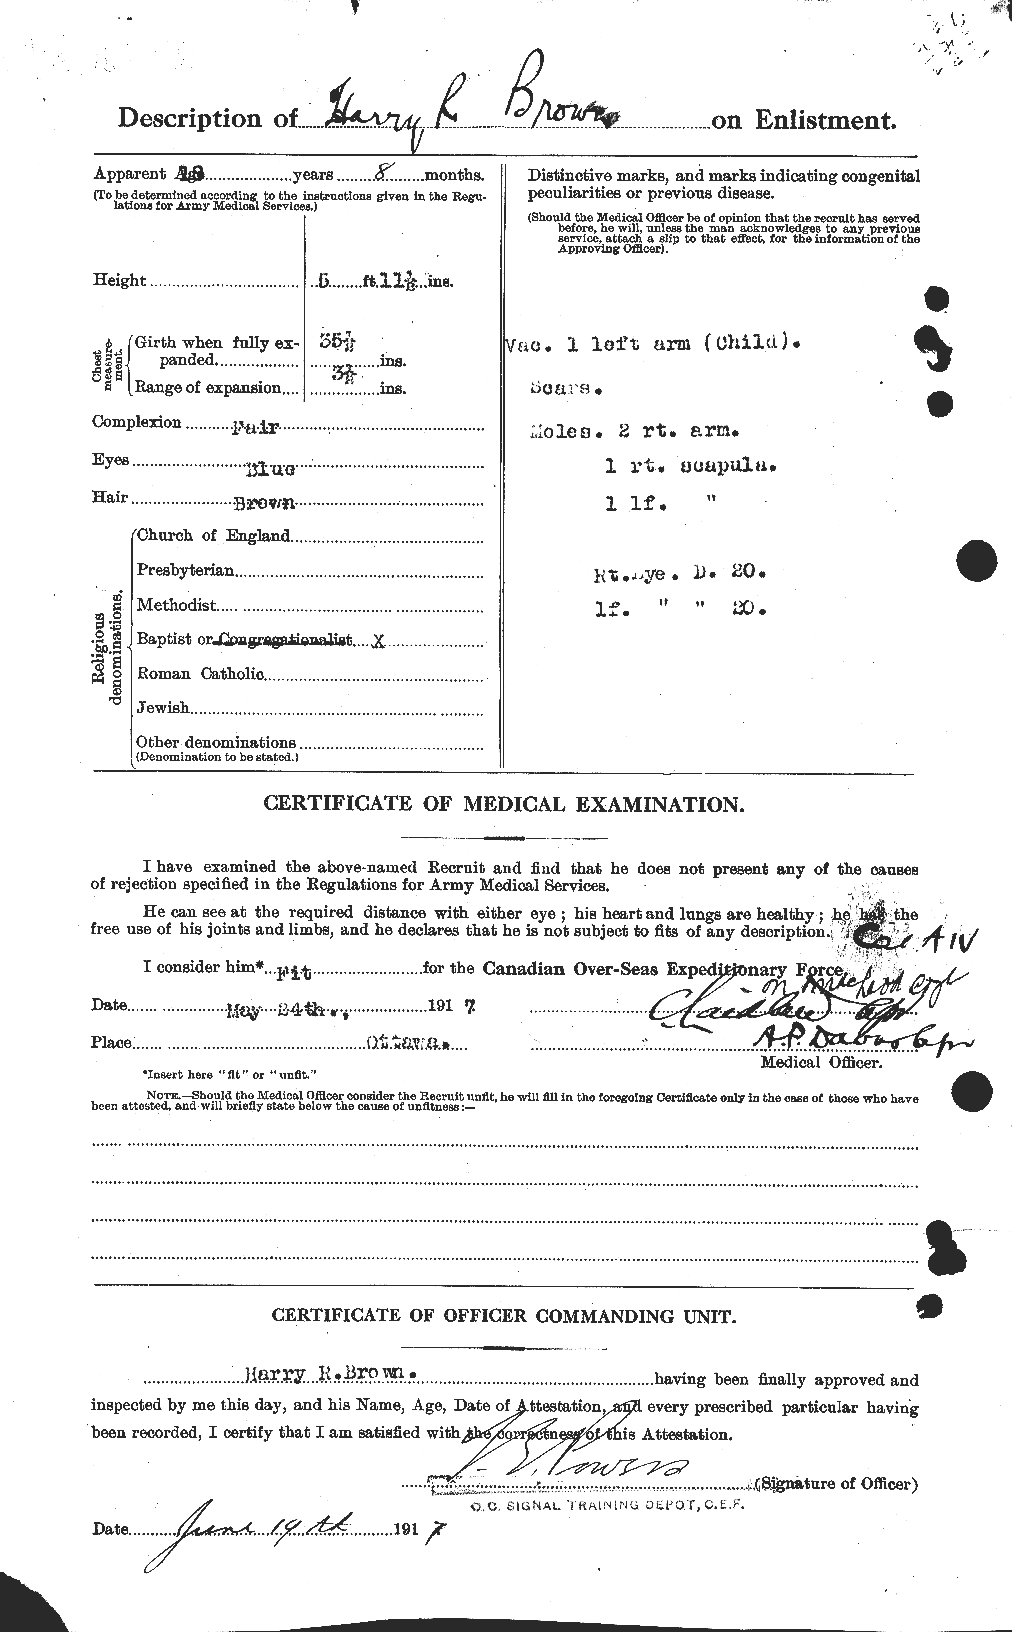 Personnel Records of the First World War - CEF 265466b